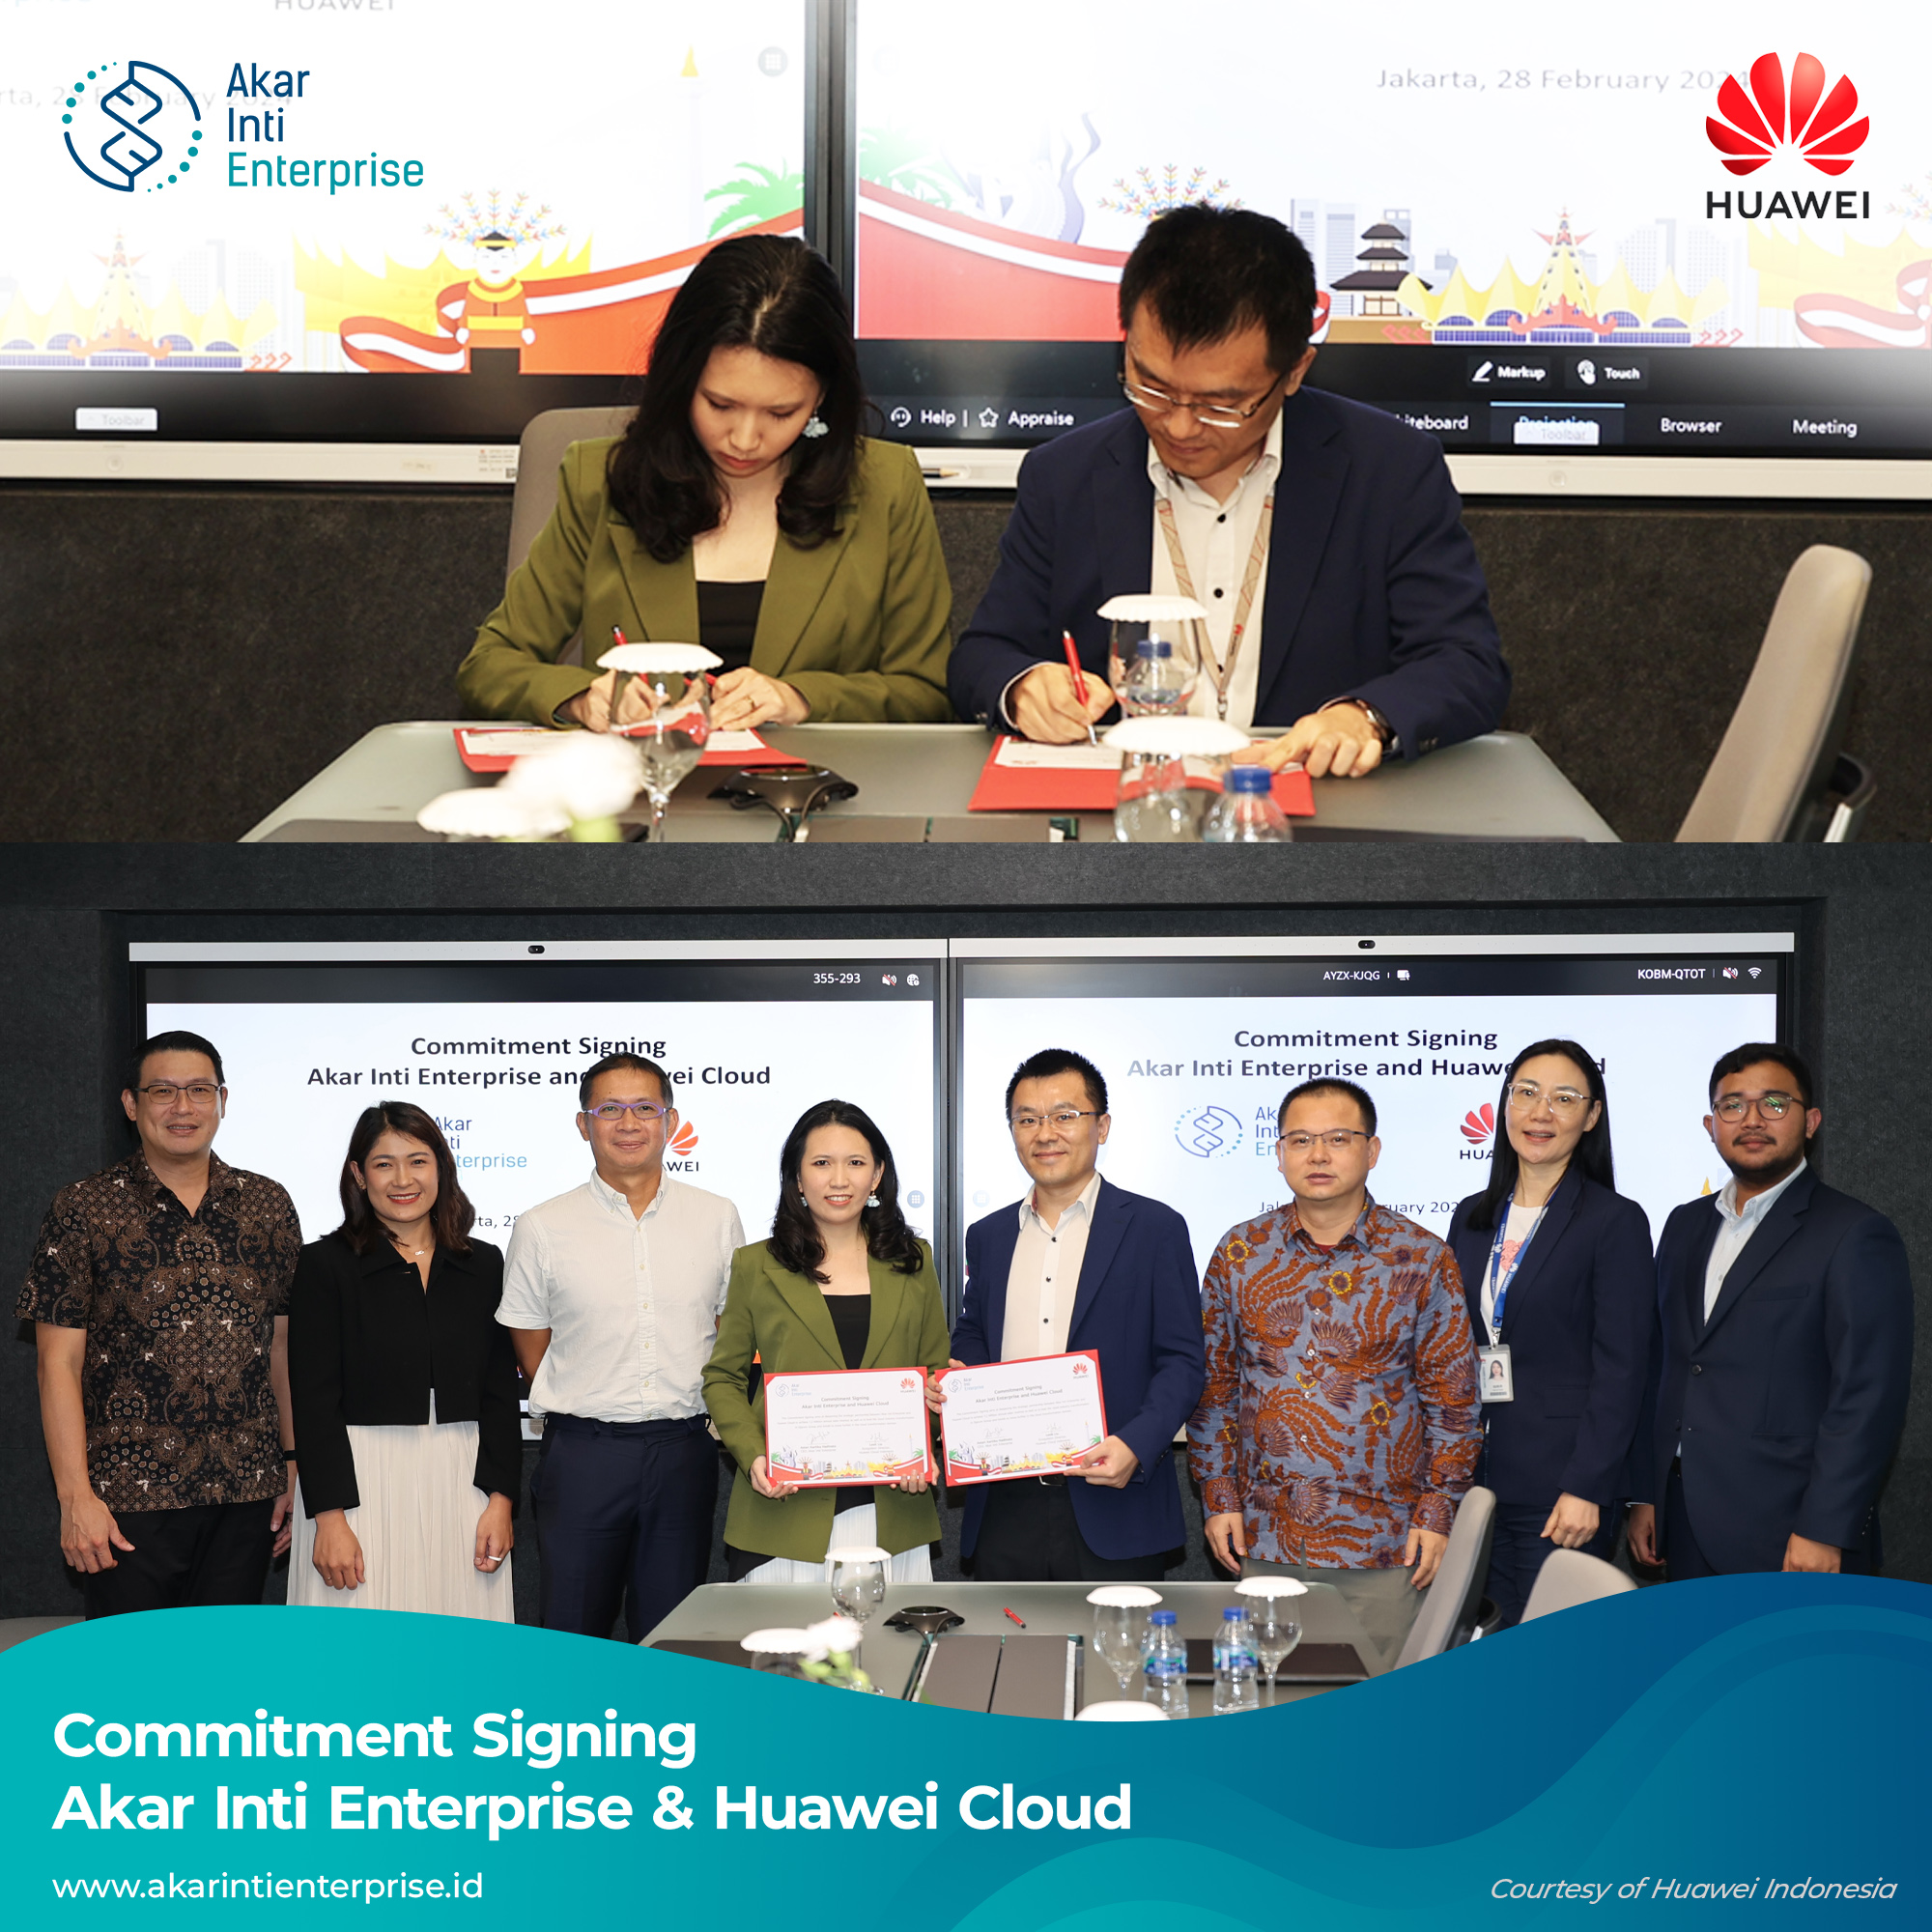 Official documentation of Akar Inti Enterprise x Huawei Cloud Indonesia Commitment Signing, with each companies' leading board of directors and representative teams.